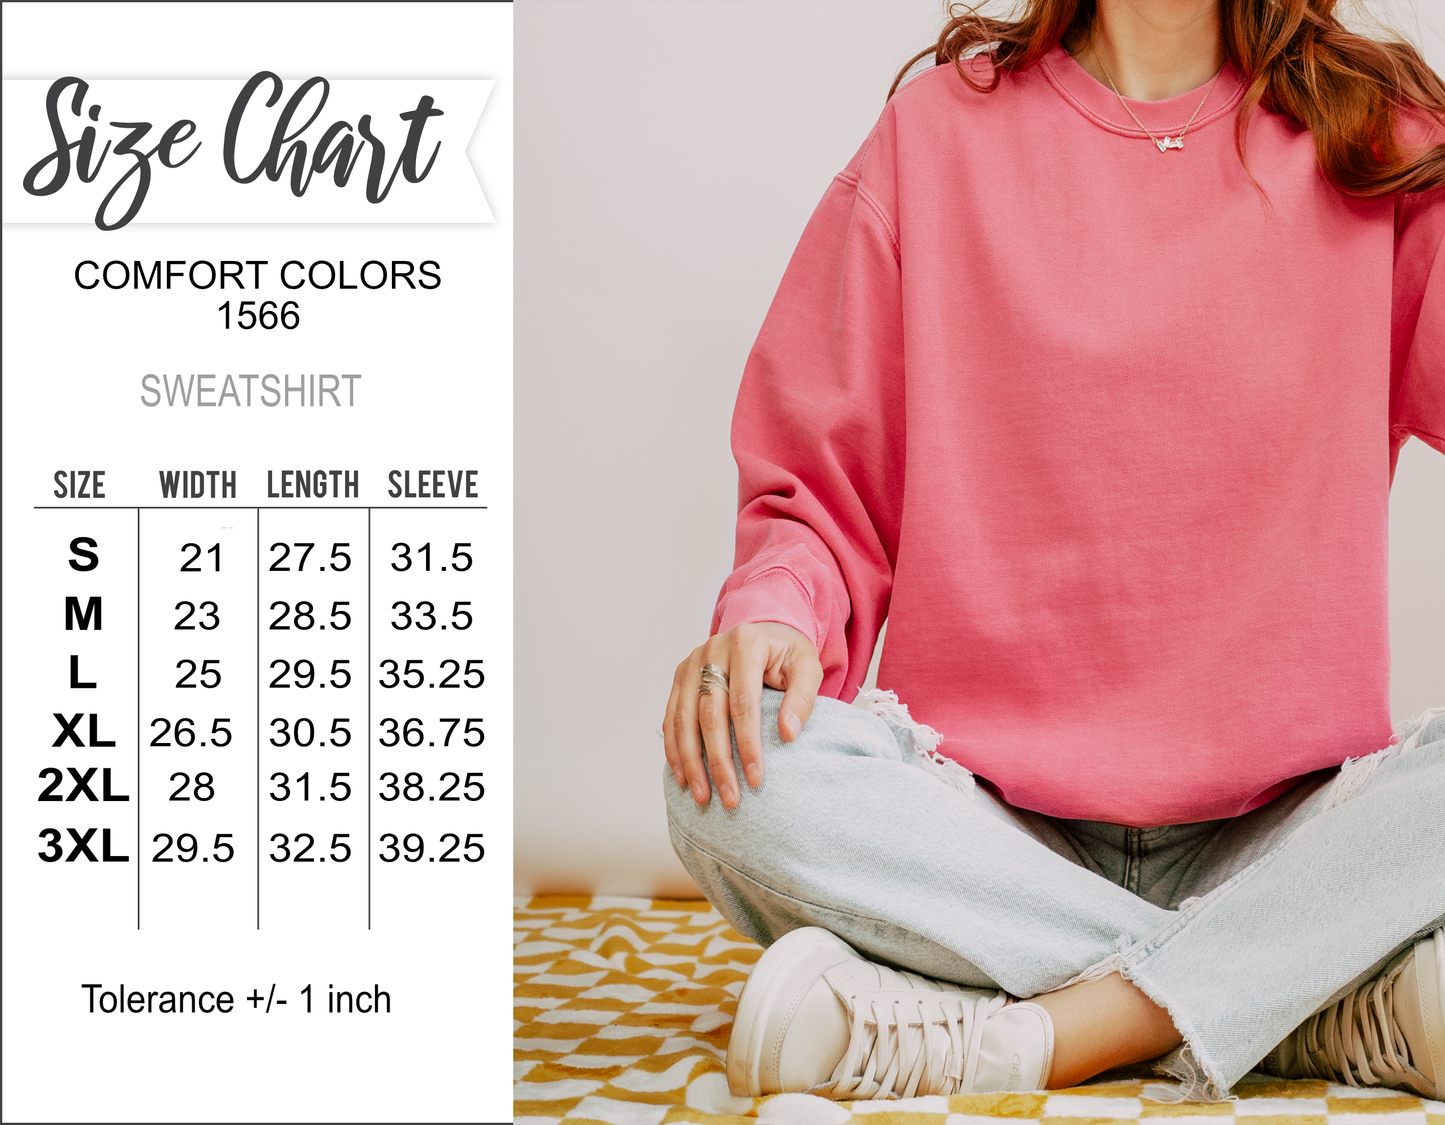 A Lot Going on at the Moment | Mardi Gras | Comfort Color Sweatshirts